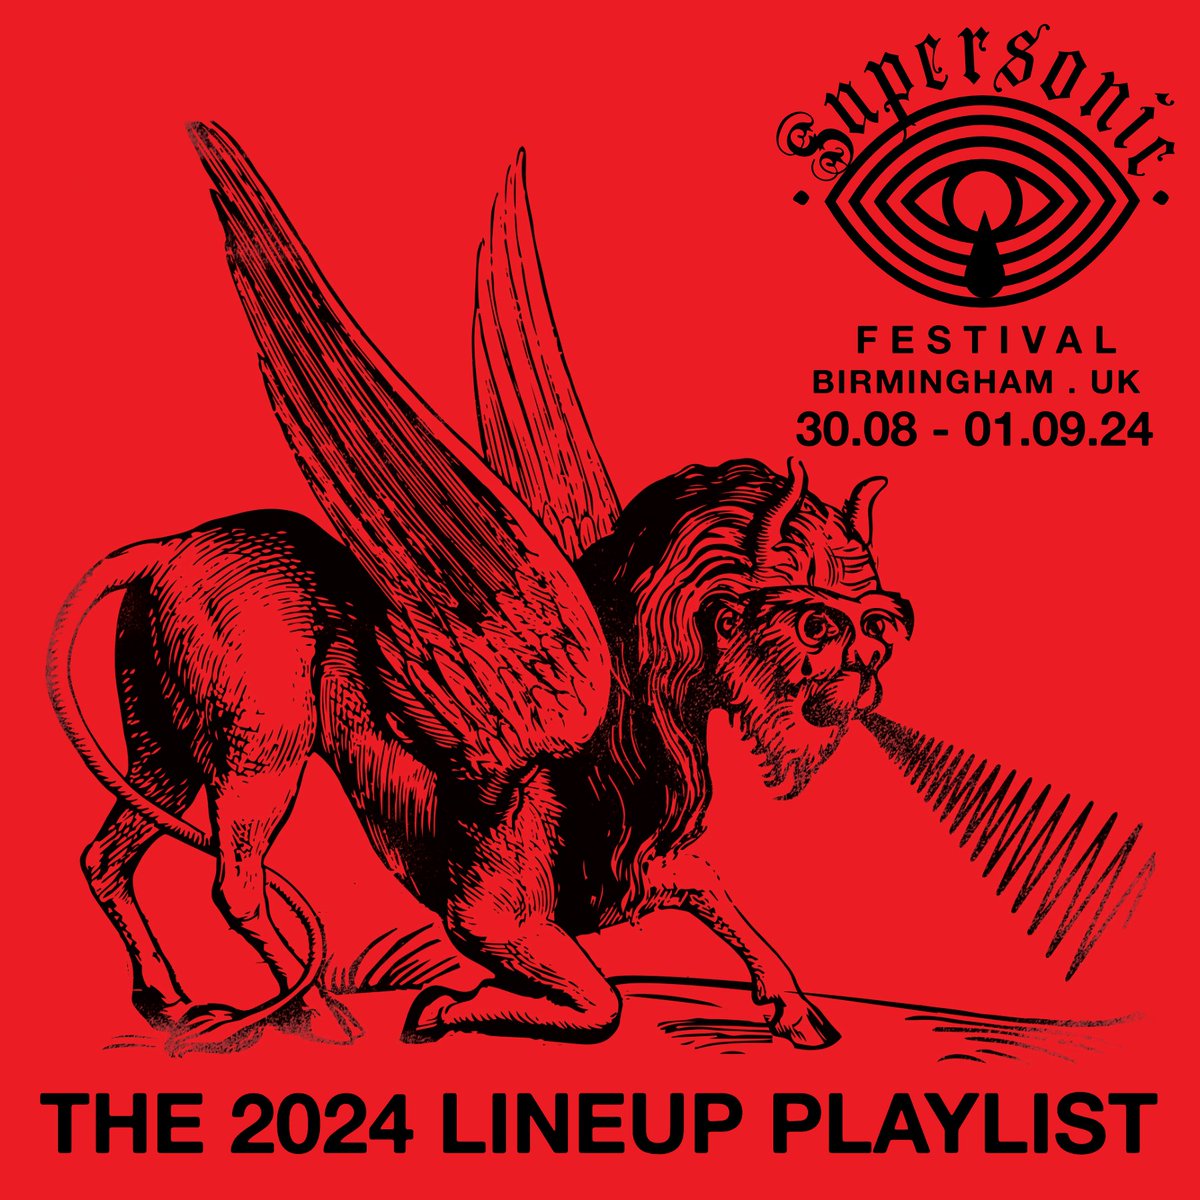 ⚡ The 2024 Lineup Playlist ⚡ Check out the latest additions to our Supersonic 2024 lineup playlist! Artists like Daisy Rickman, Dame Area, Grove, Robert Aiki Aubrey Lowe, UKAEA & Vile Creature are now included. 🔥 Listen here - spoti.fi/3V7lzC4 🎧